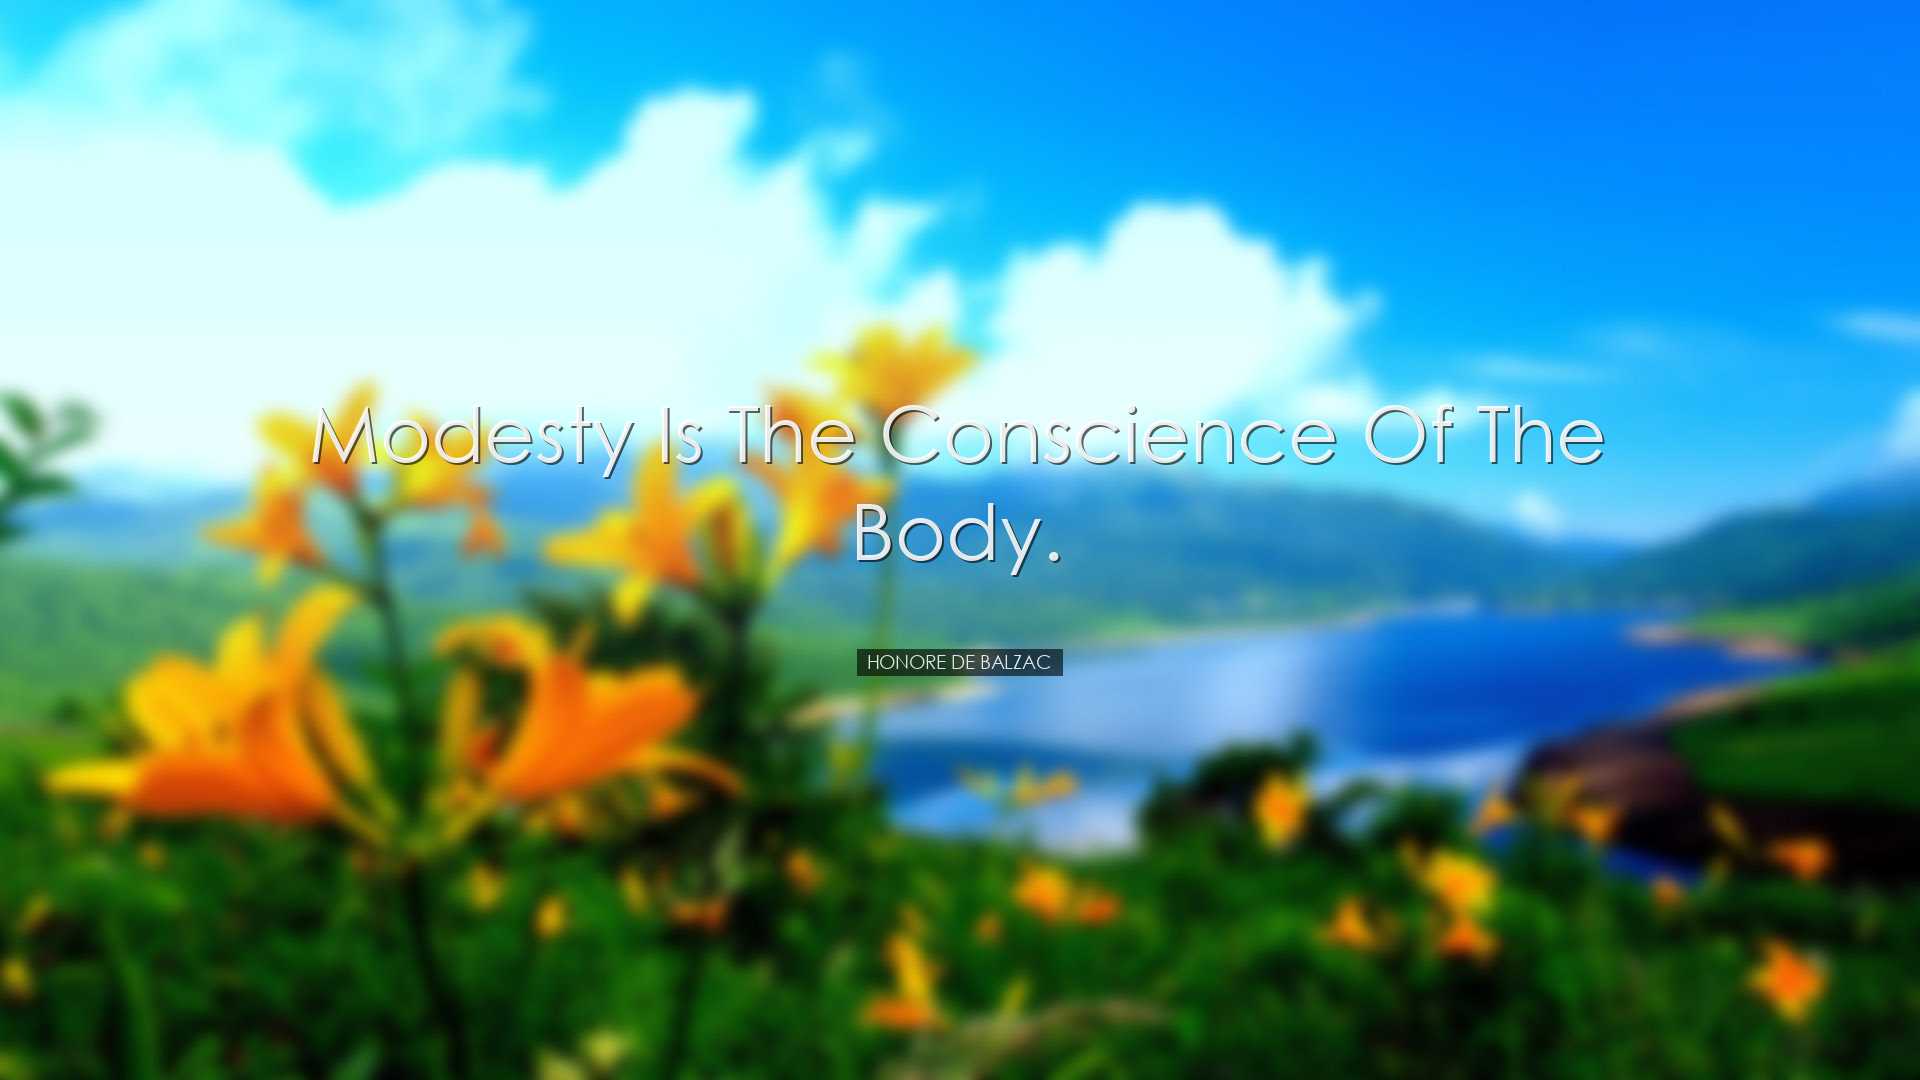 Modesty is the conscience of the body. - Honore de Balzac